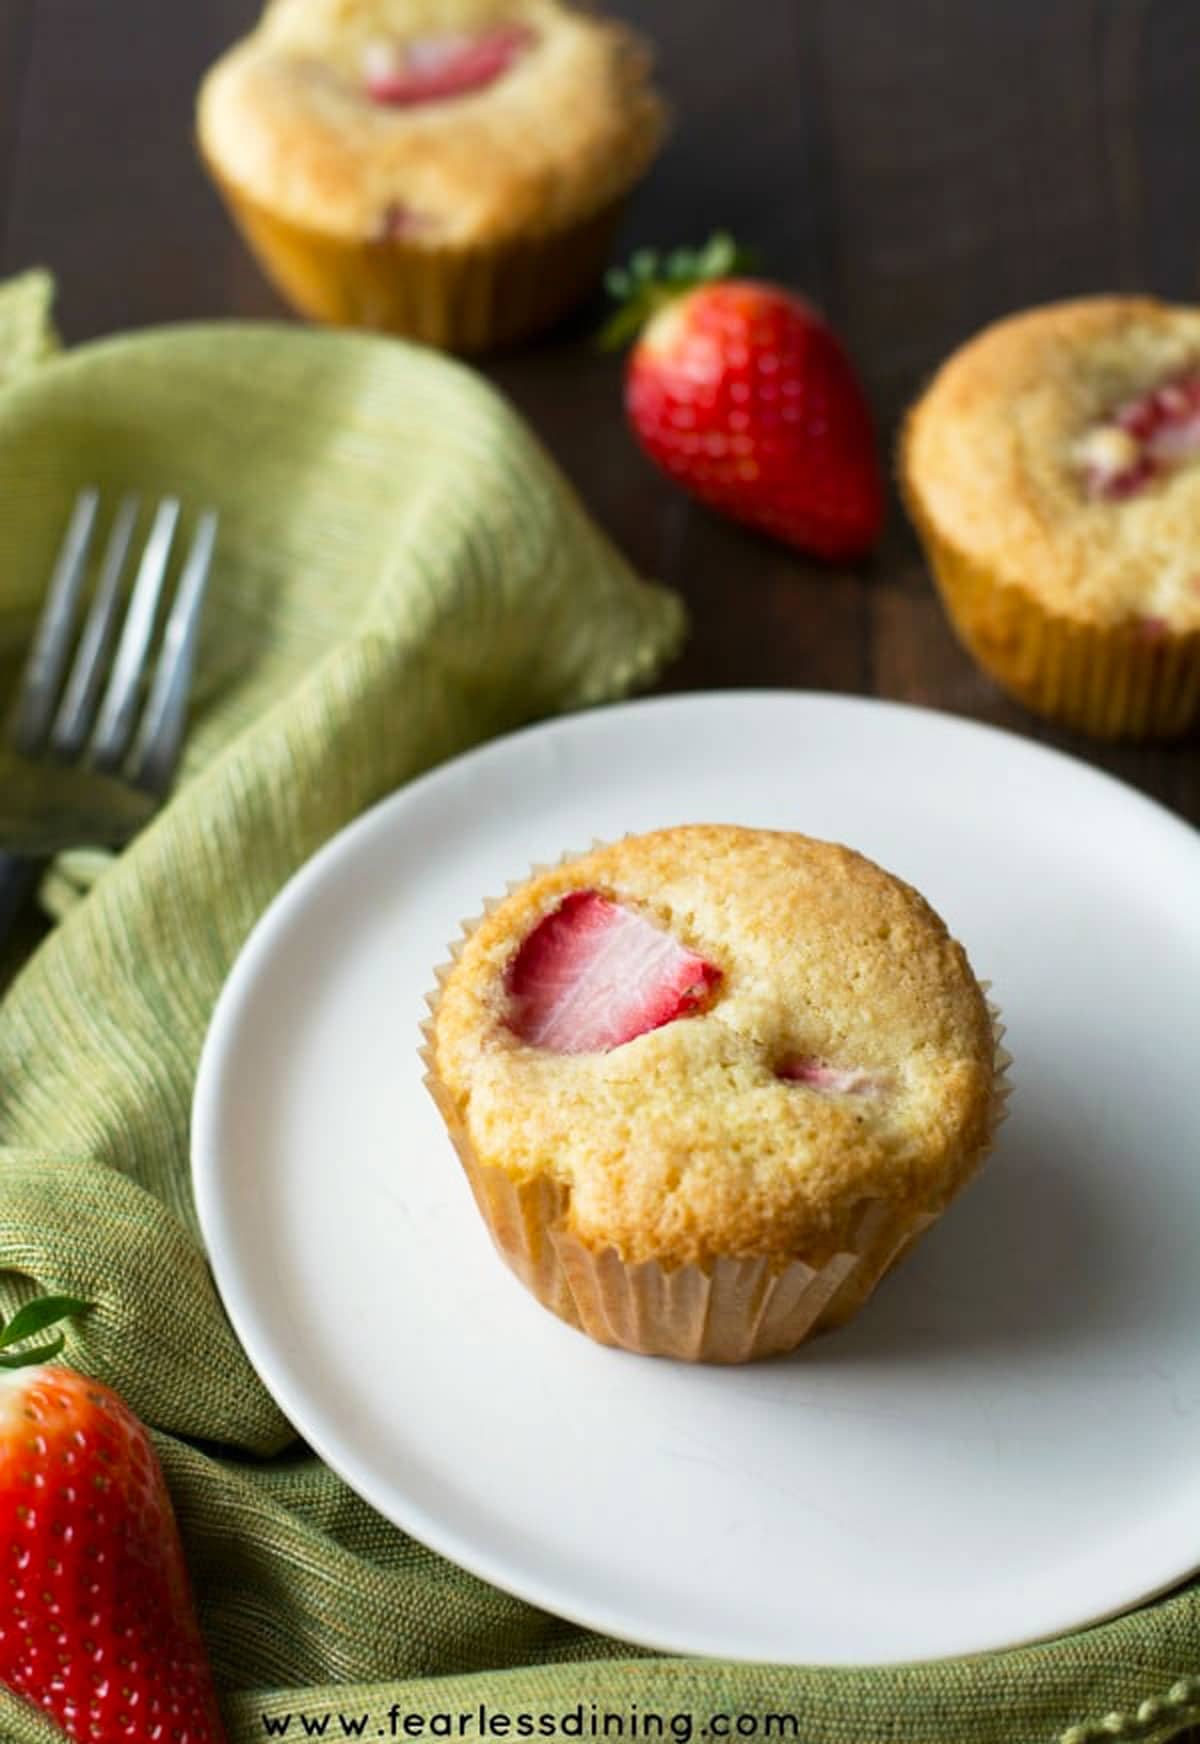 A gluten free strawberry muffin on a white plate.